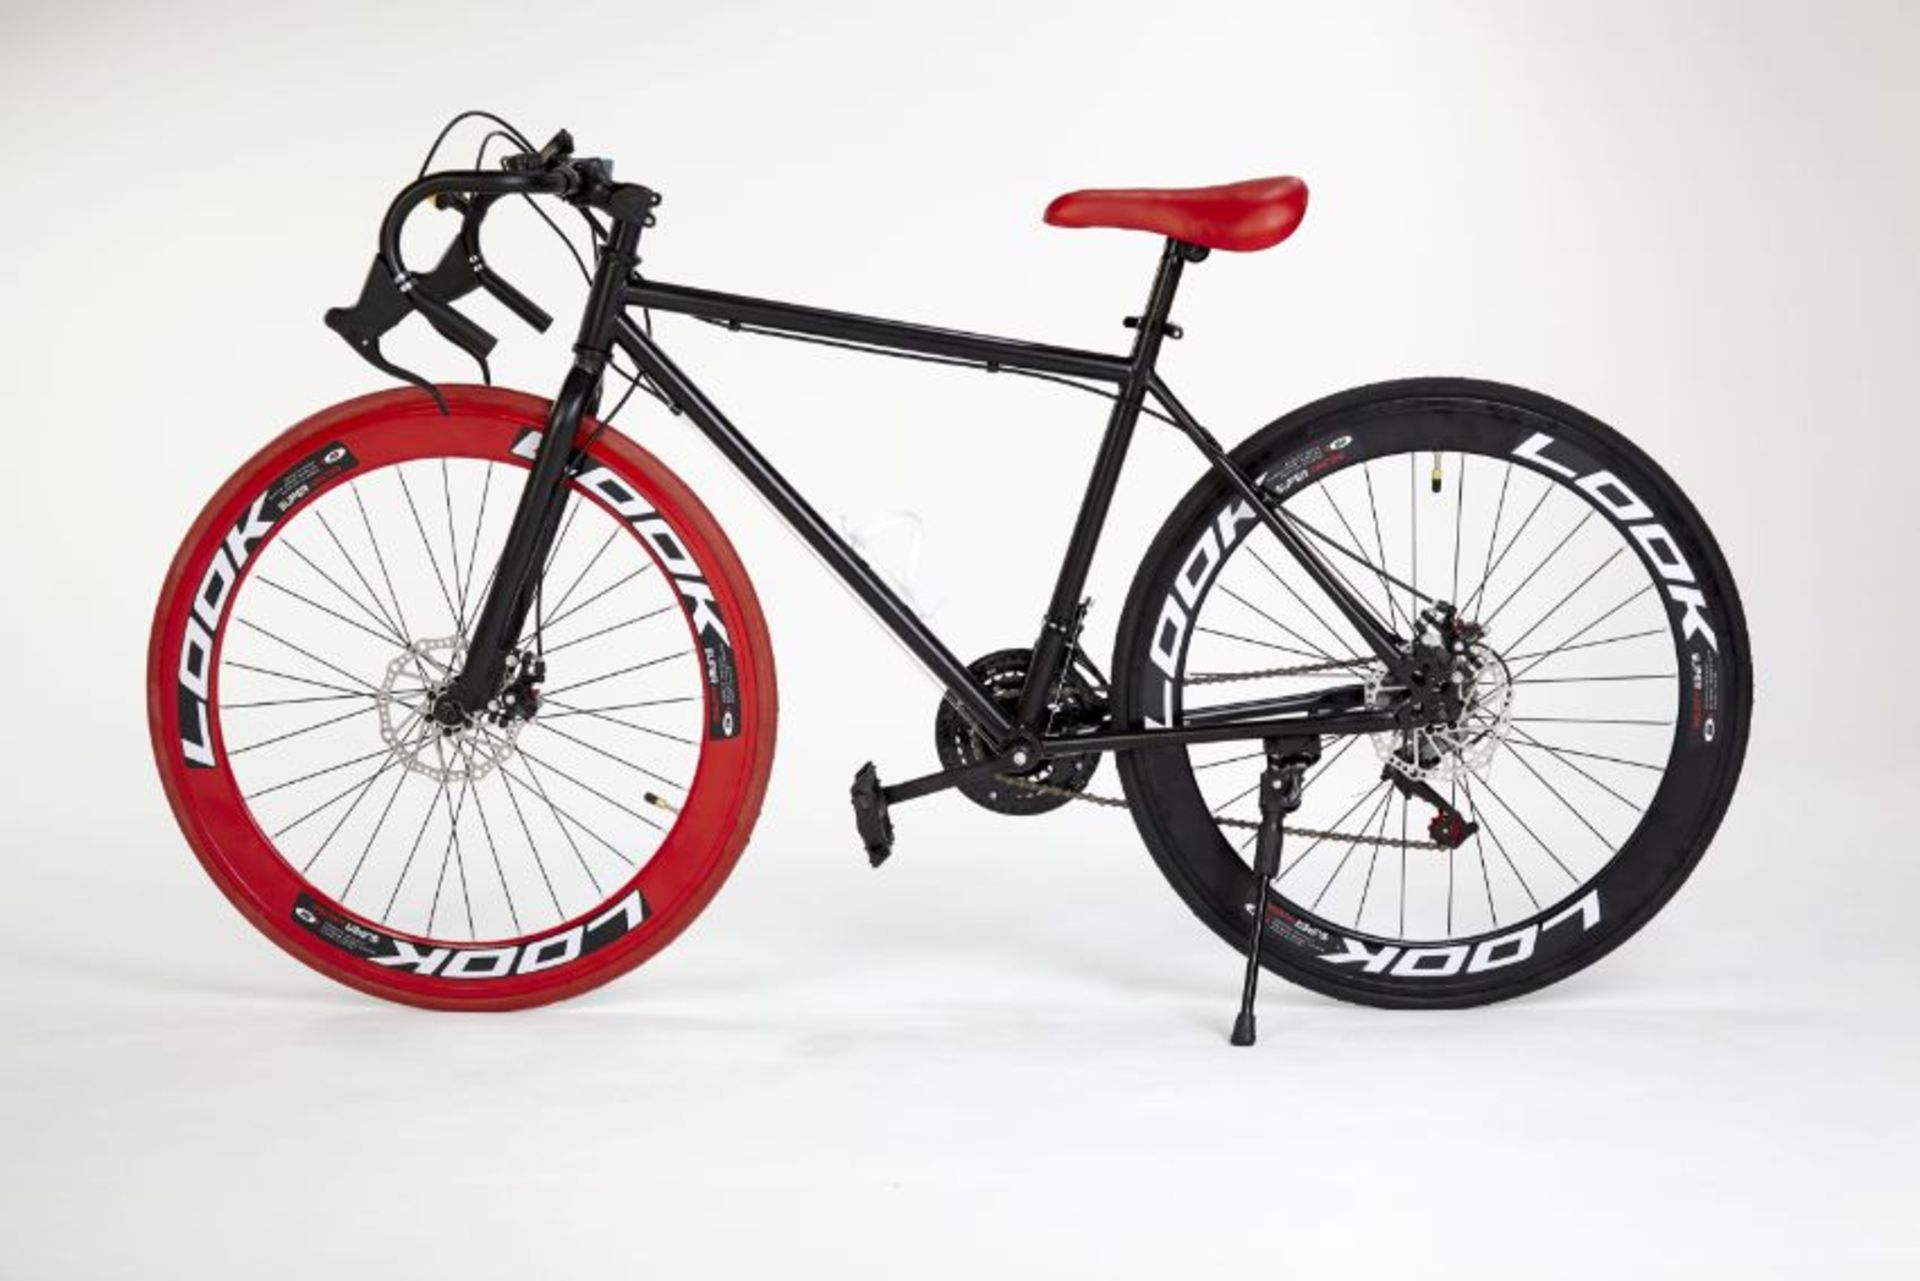 RED/BLACK STREET BIKE WITH 21 GREAR, BRAKE DISKS, KICK STAND, COOL THIN TYRES COMES BOXED - Image 5 of 10